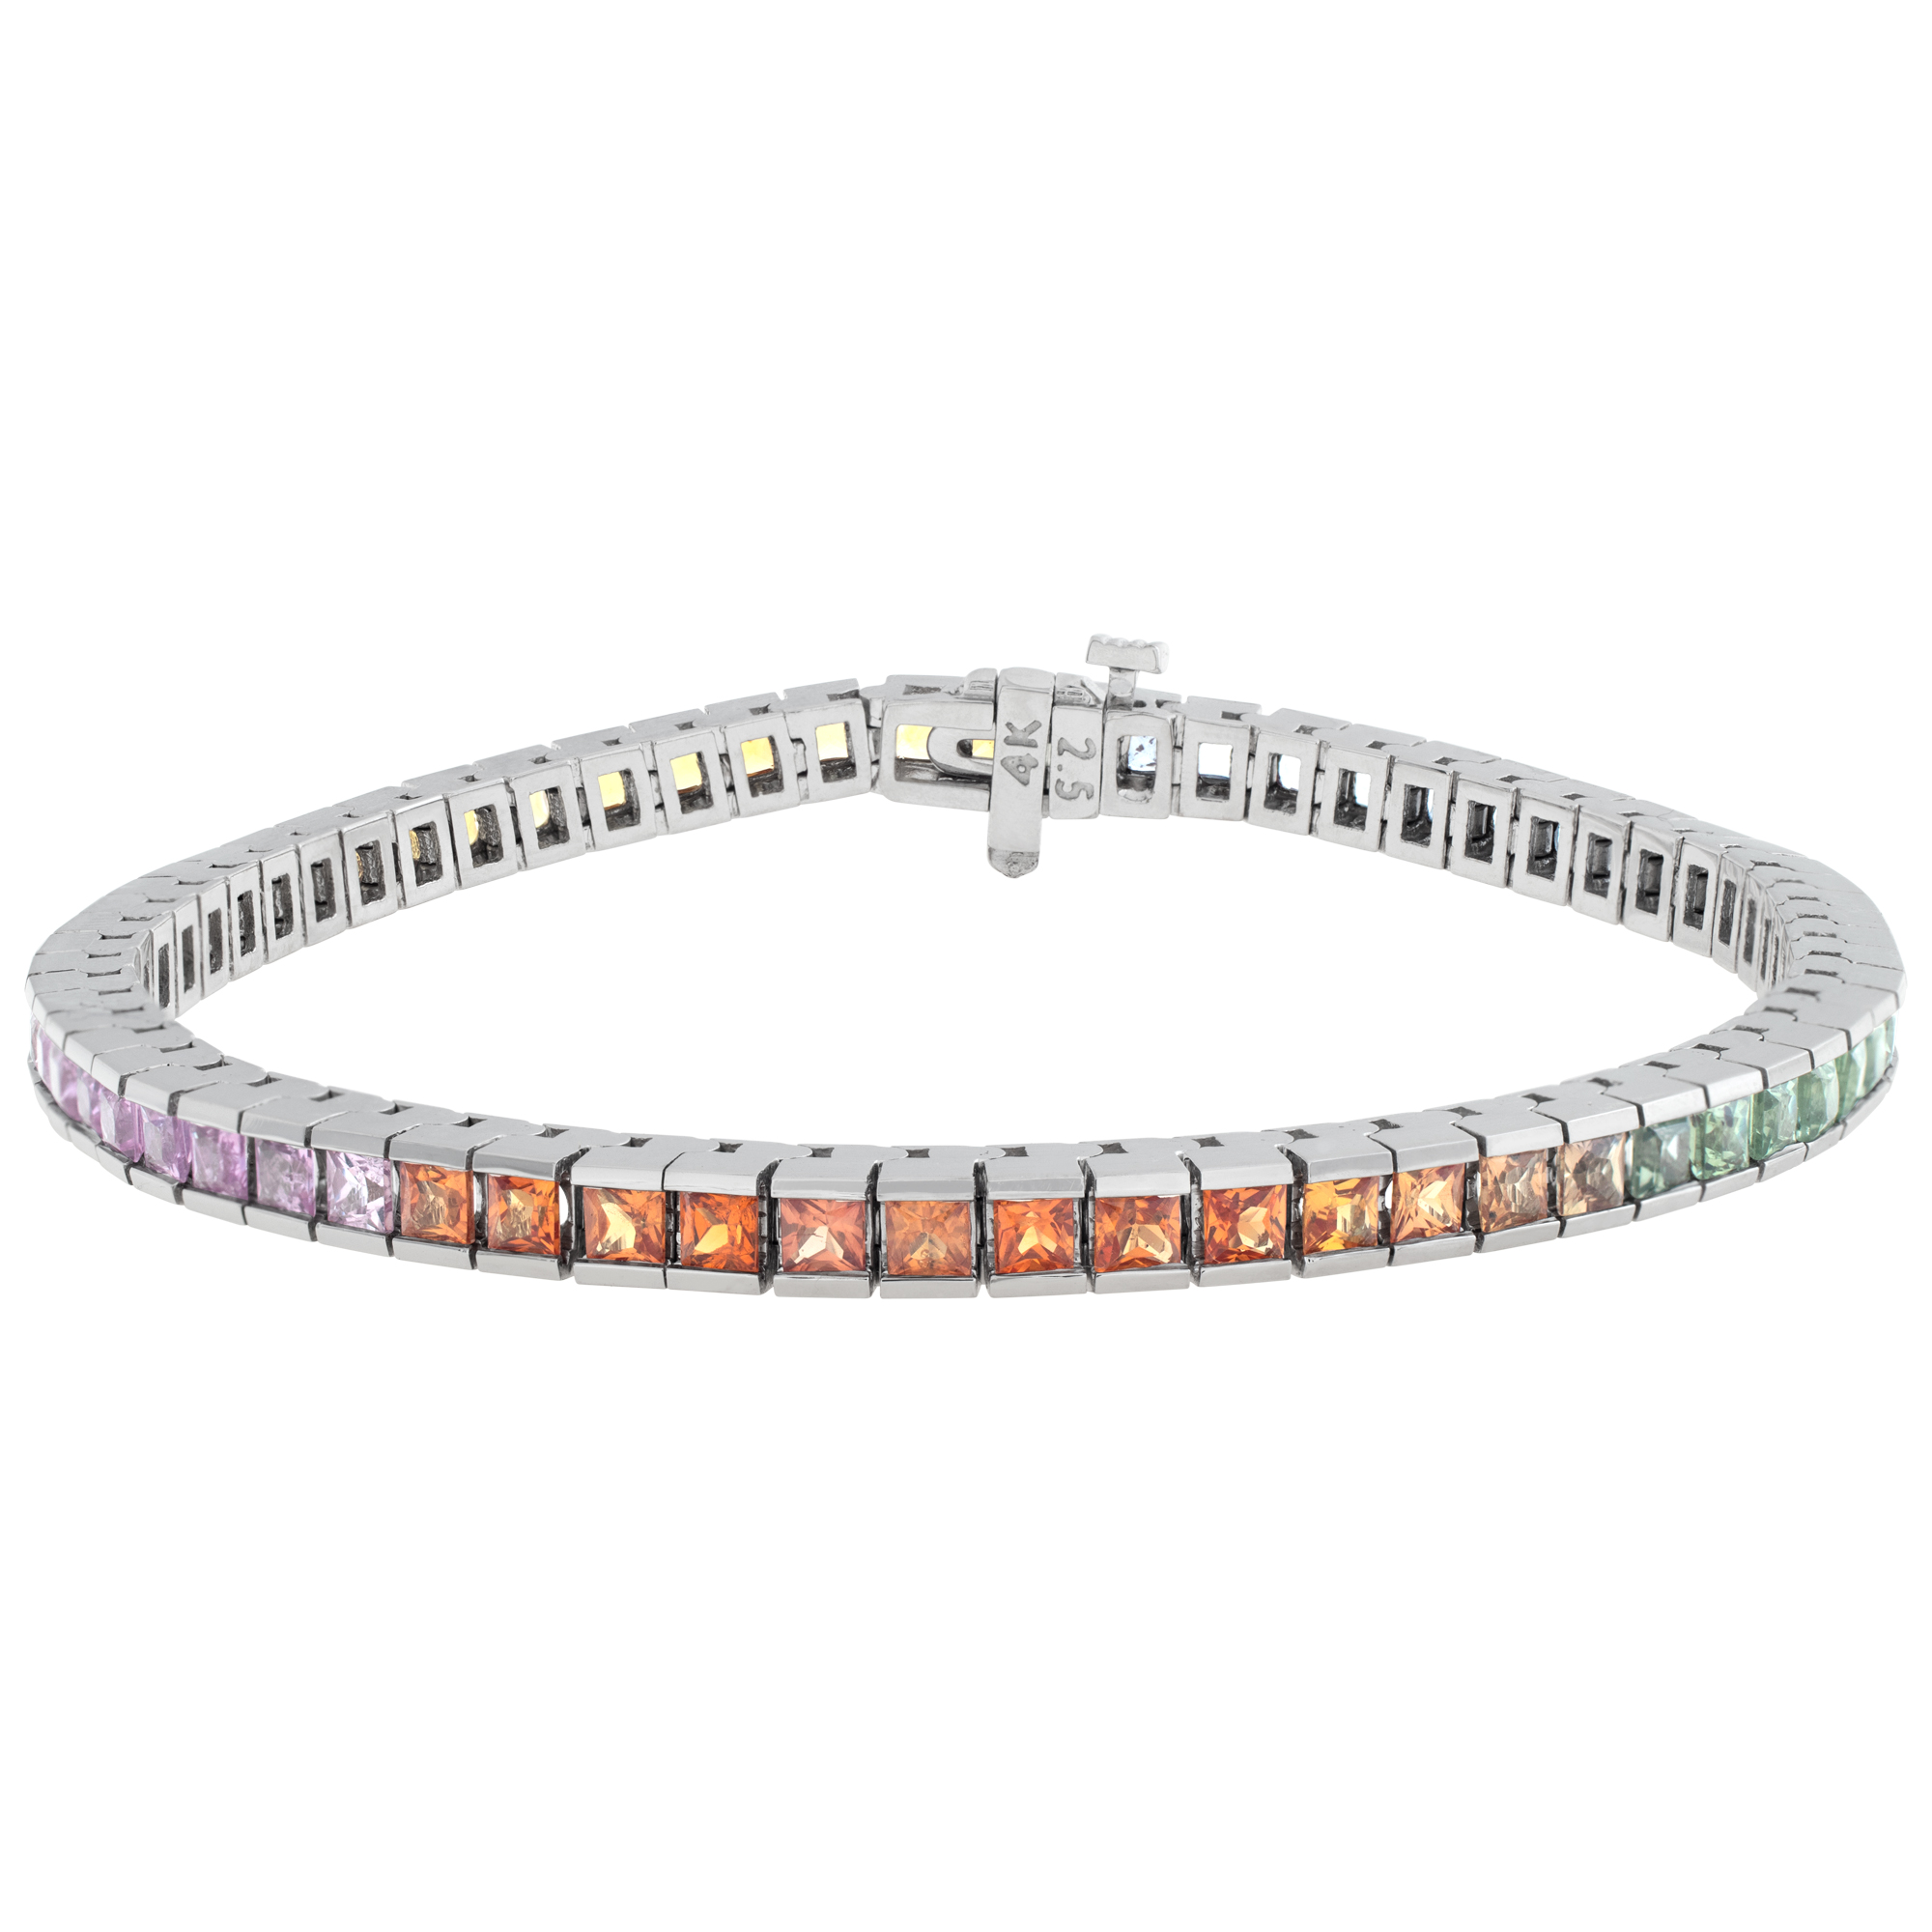 Multi-Color Sapphire bracelet set in 14k white gold with 8.50 carats in sapphires.